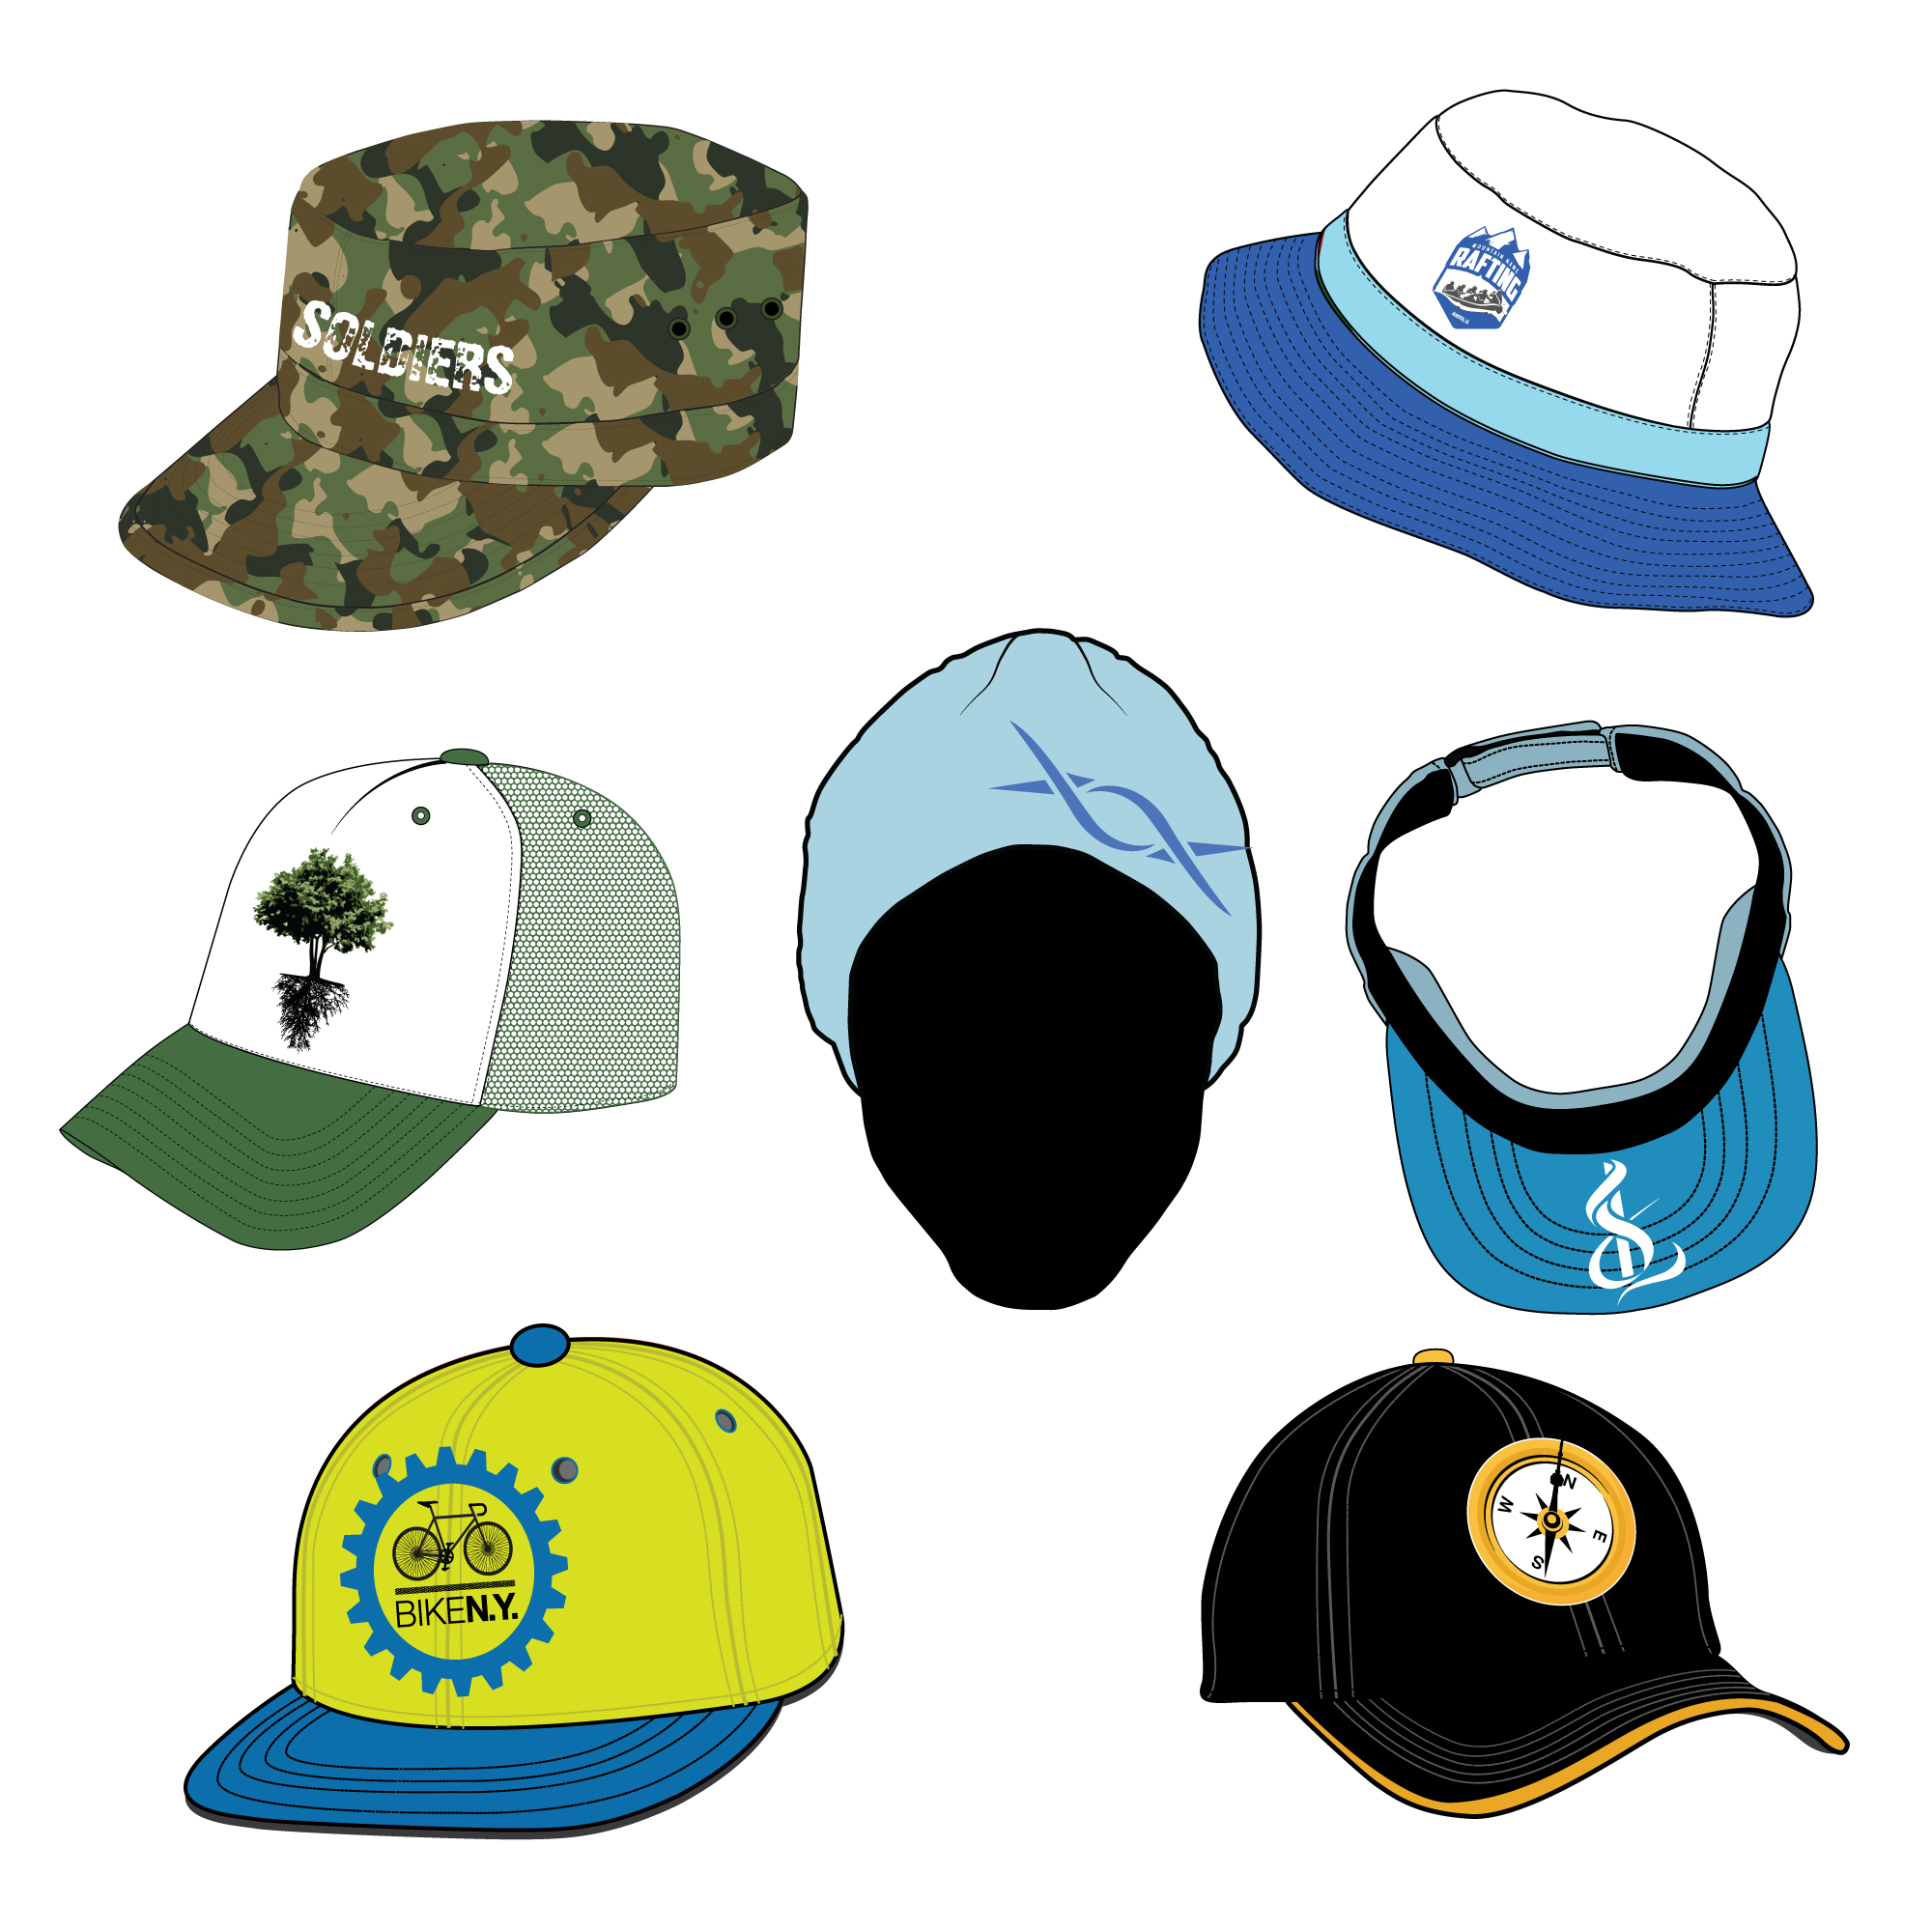 Hats/Caps Bundle - Bucket Hats, Curved Brim Hats, Flat Brim Hats, Military Caps, Visor Hats, Trucker Cap, Beanies - Mockup and Template - 76 Hats Total, Multiple Angles, 7 Styles, Layered, Detailed and Editable Vector in EPS, SVG, AI, PNG, DXF and PDF